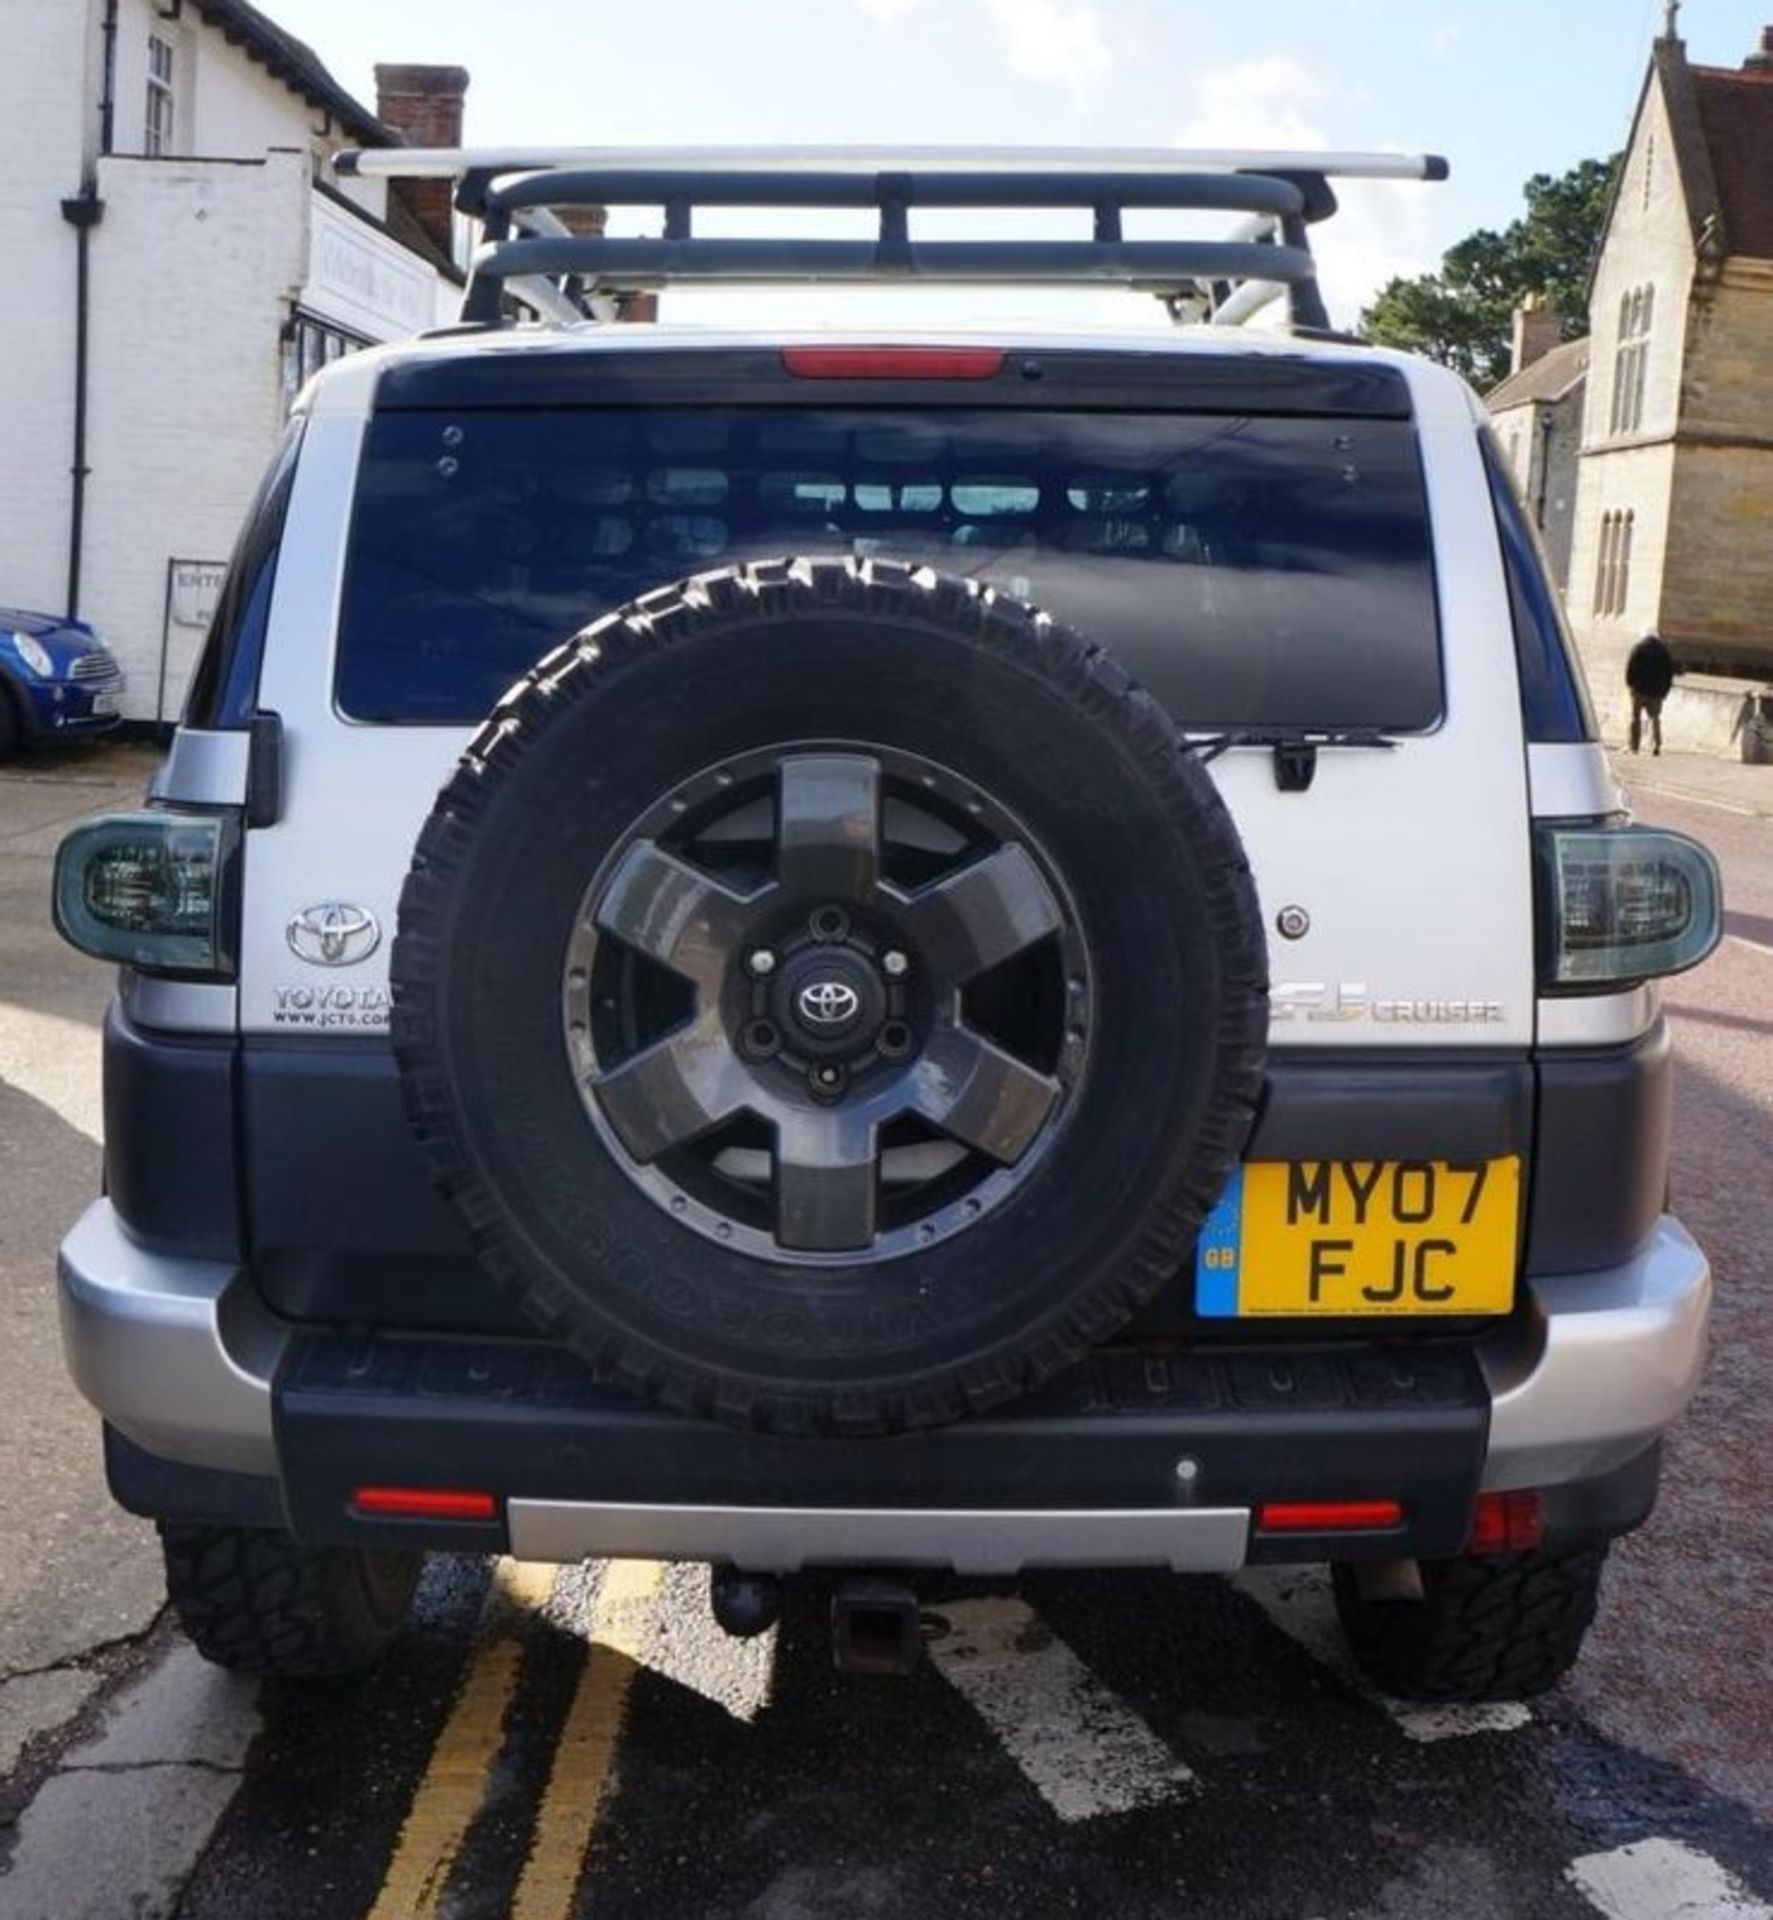 2007 57 reg - Such a rare car - The stunning Toyota FJ Cruiser 4.0 V6 Automatic 4x4, LEFT HAND DRIVE - Image 2 of 6